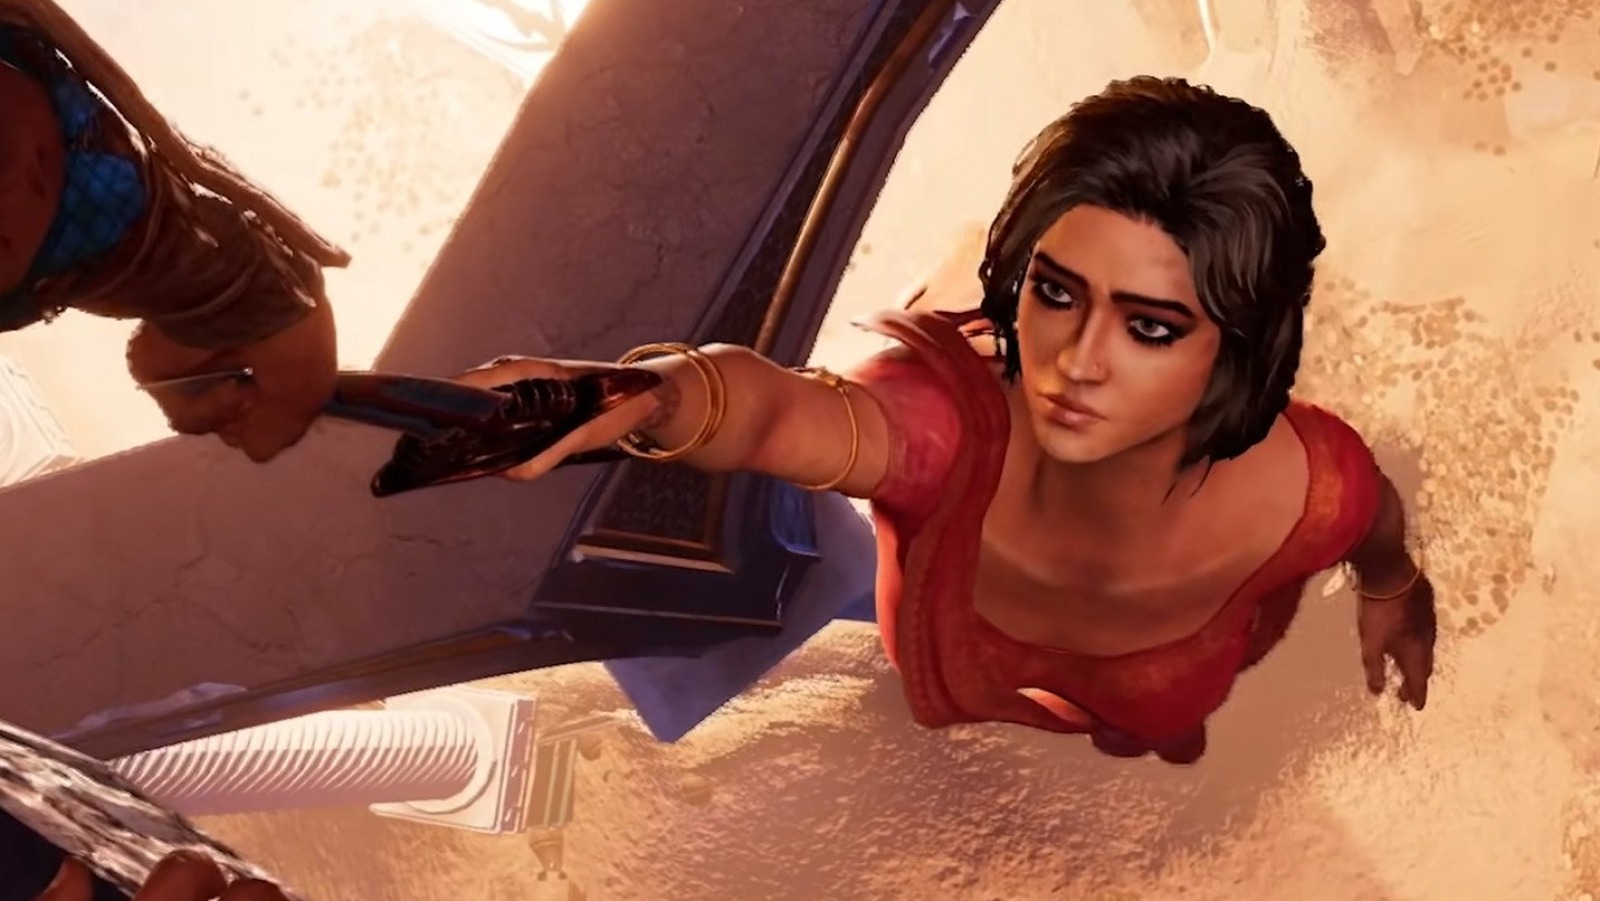 prince of persia remake release date